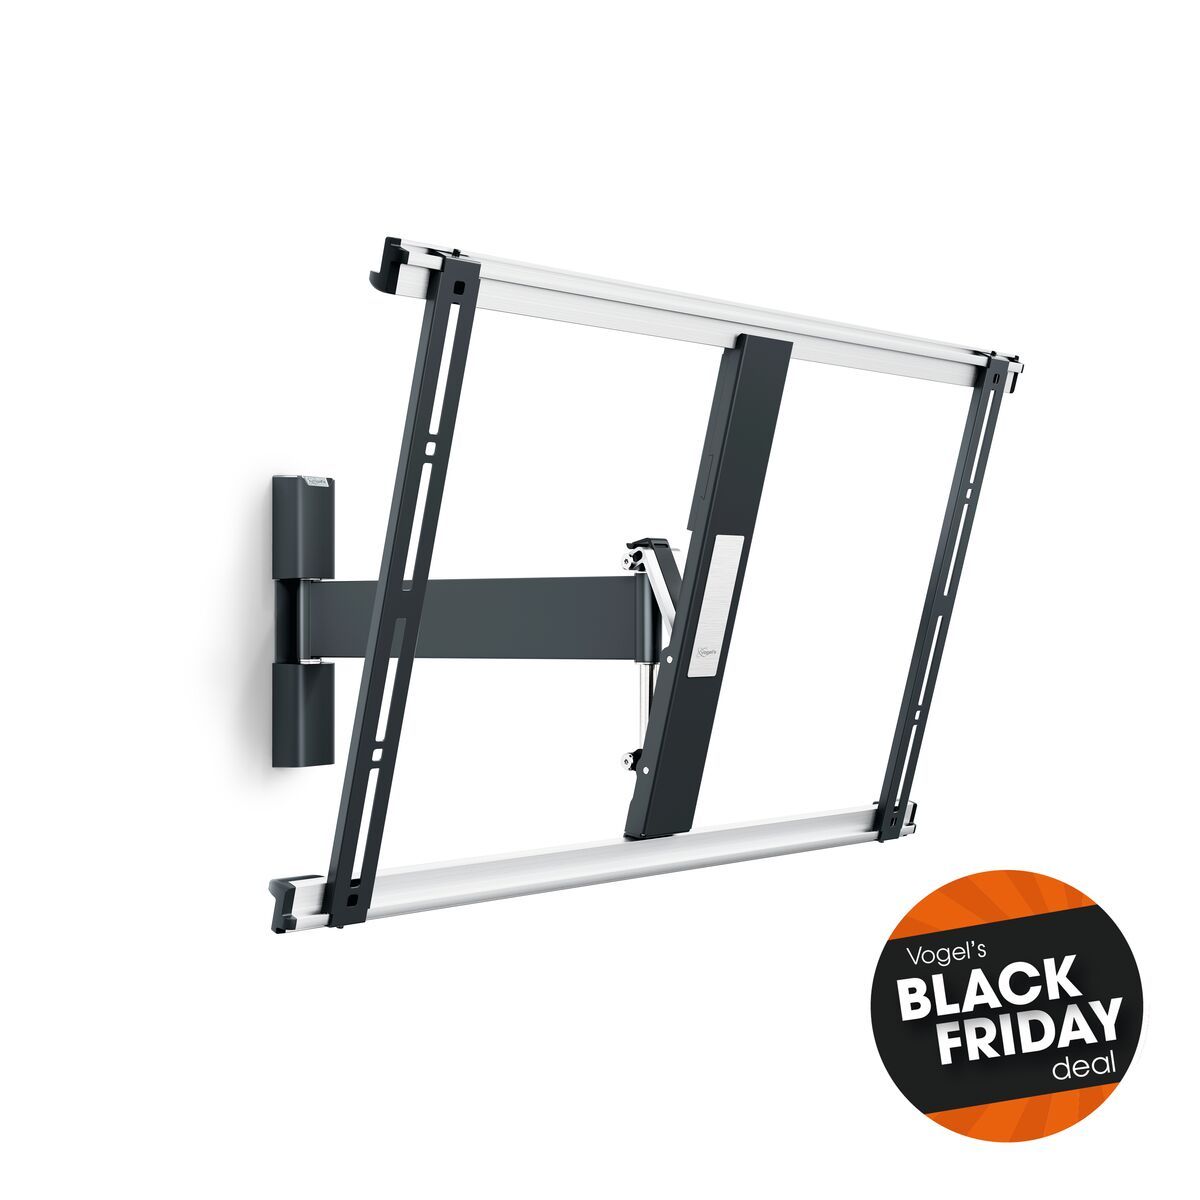 Vogel's THIN 525 ExtraThin Full-Motion TV Wall Mount - Suitable for 40 up to 65 inch TVs - Motion (up to 120°) - Tilt up to 20° - Promo